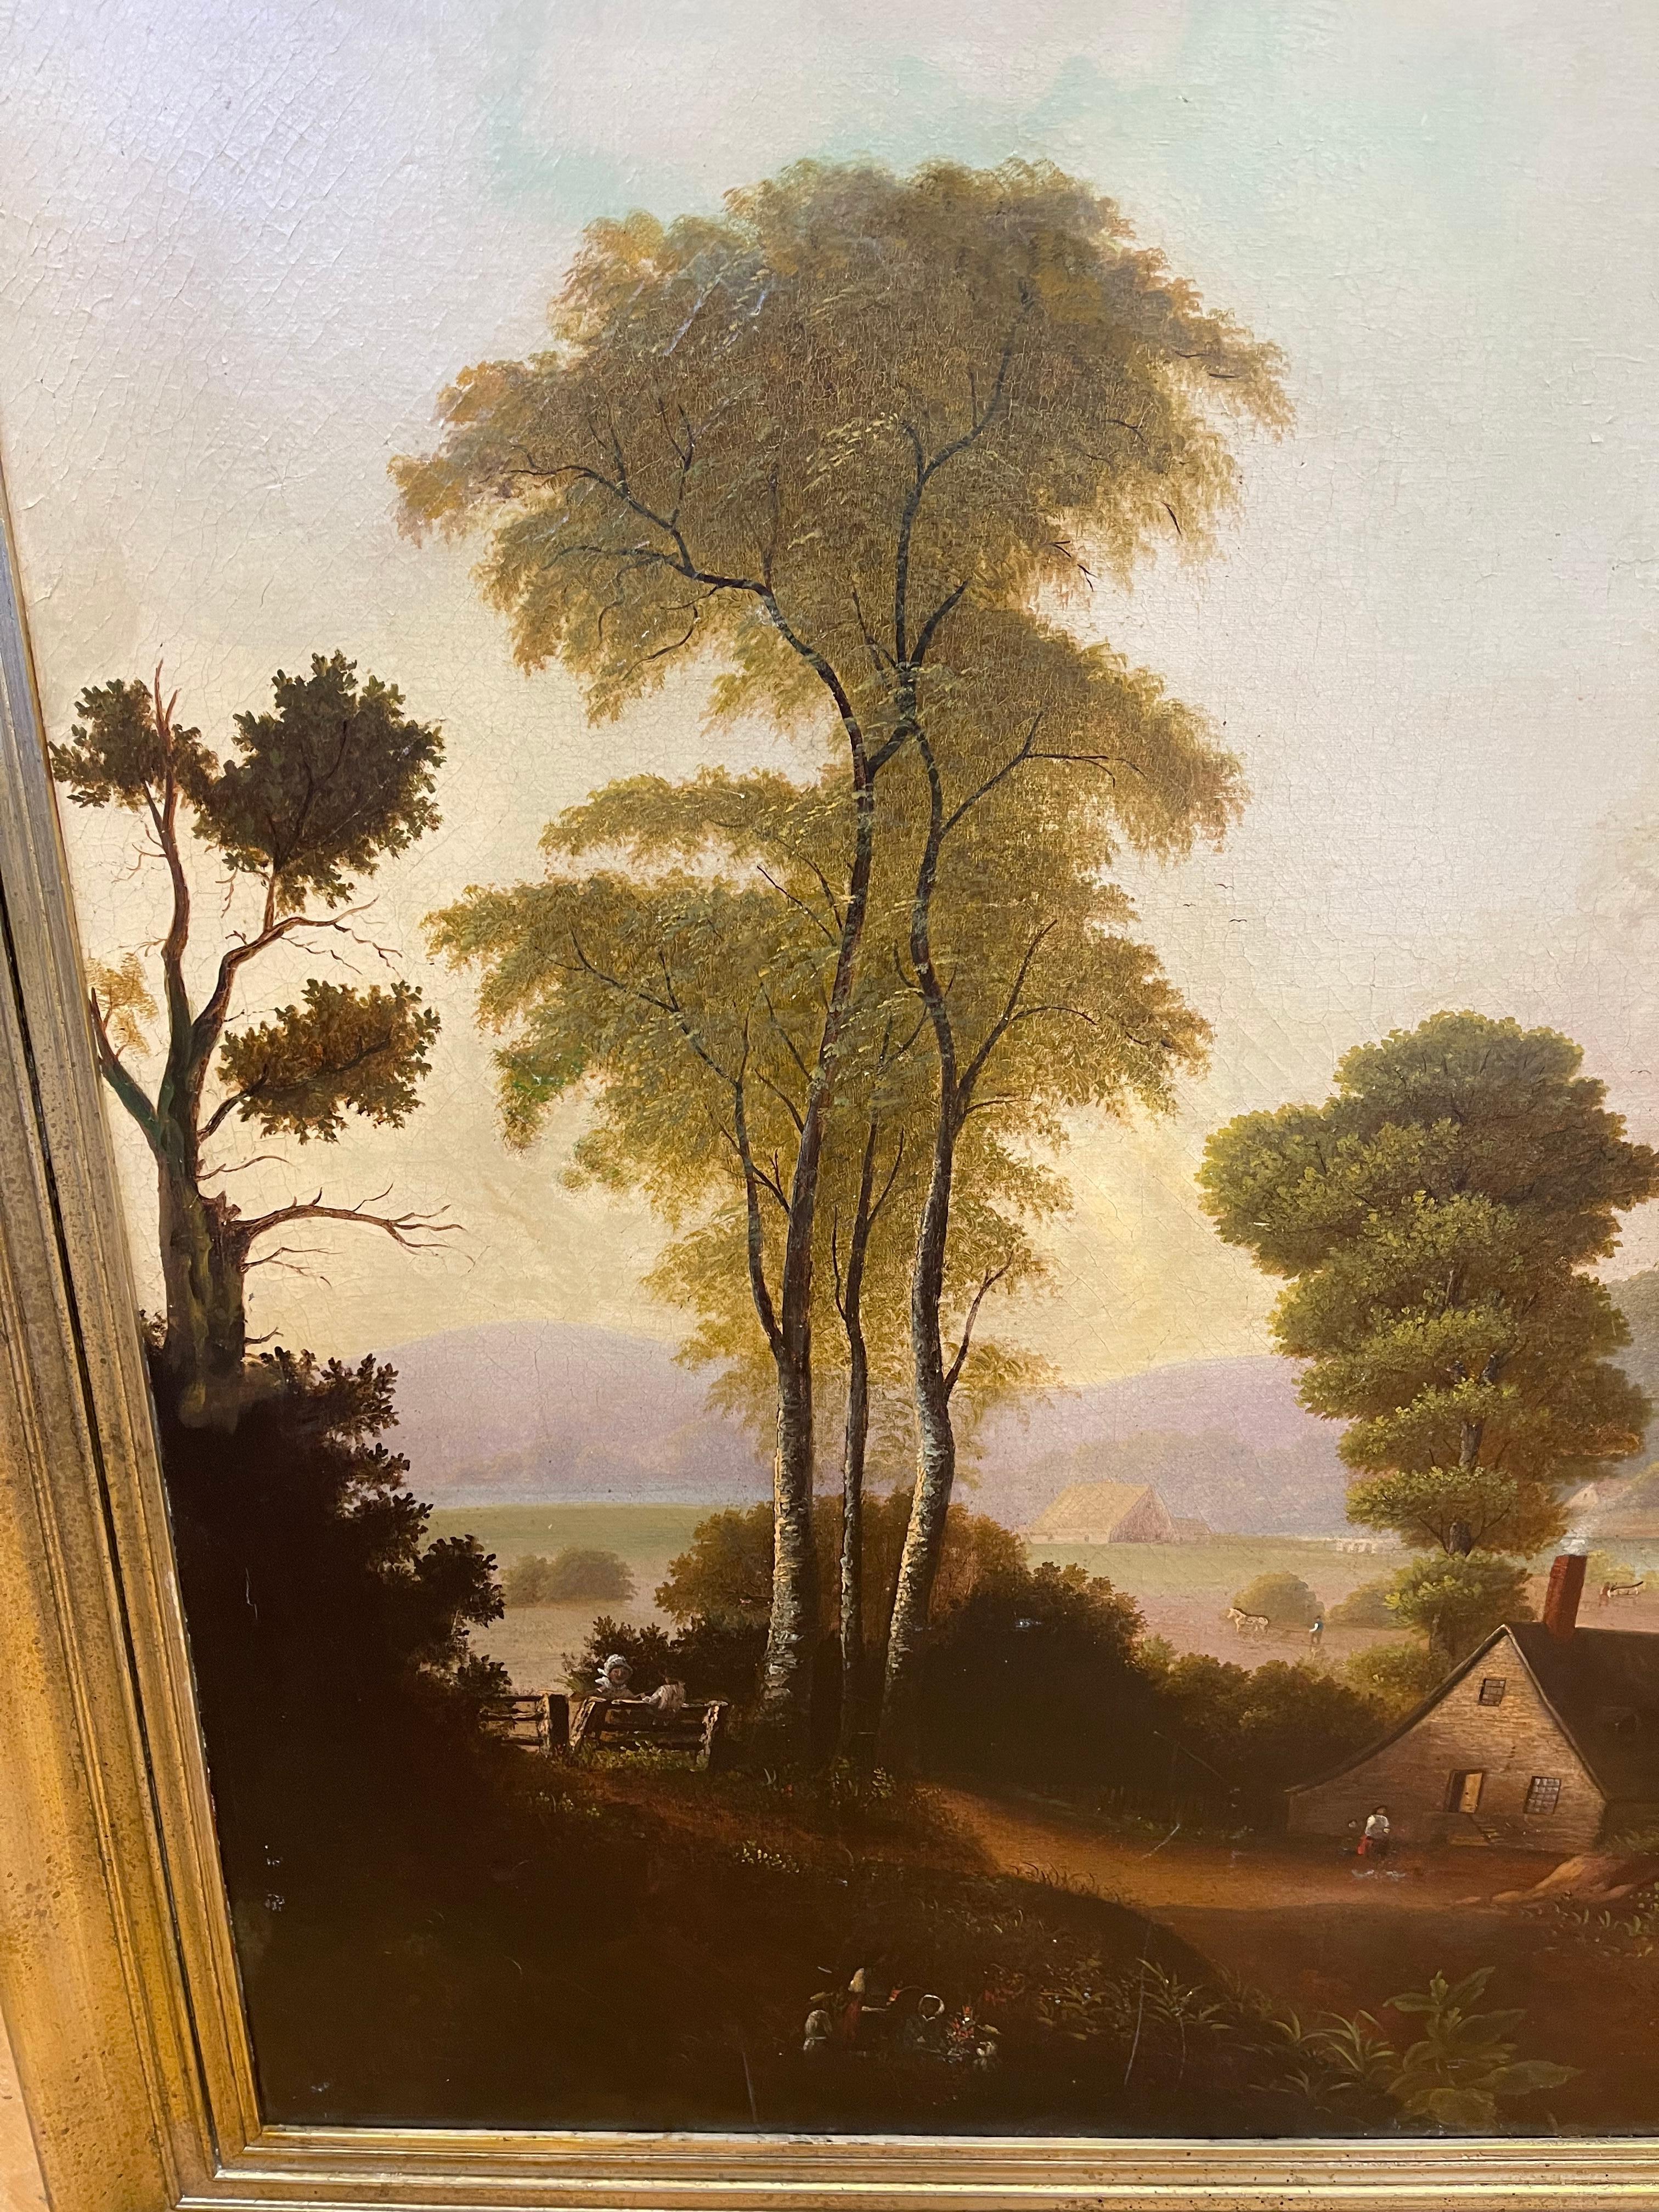 Romantic 19th Century American Landscape Painting in Style of George Caleb Bingham For Sale